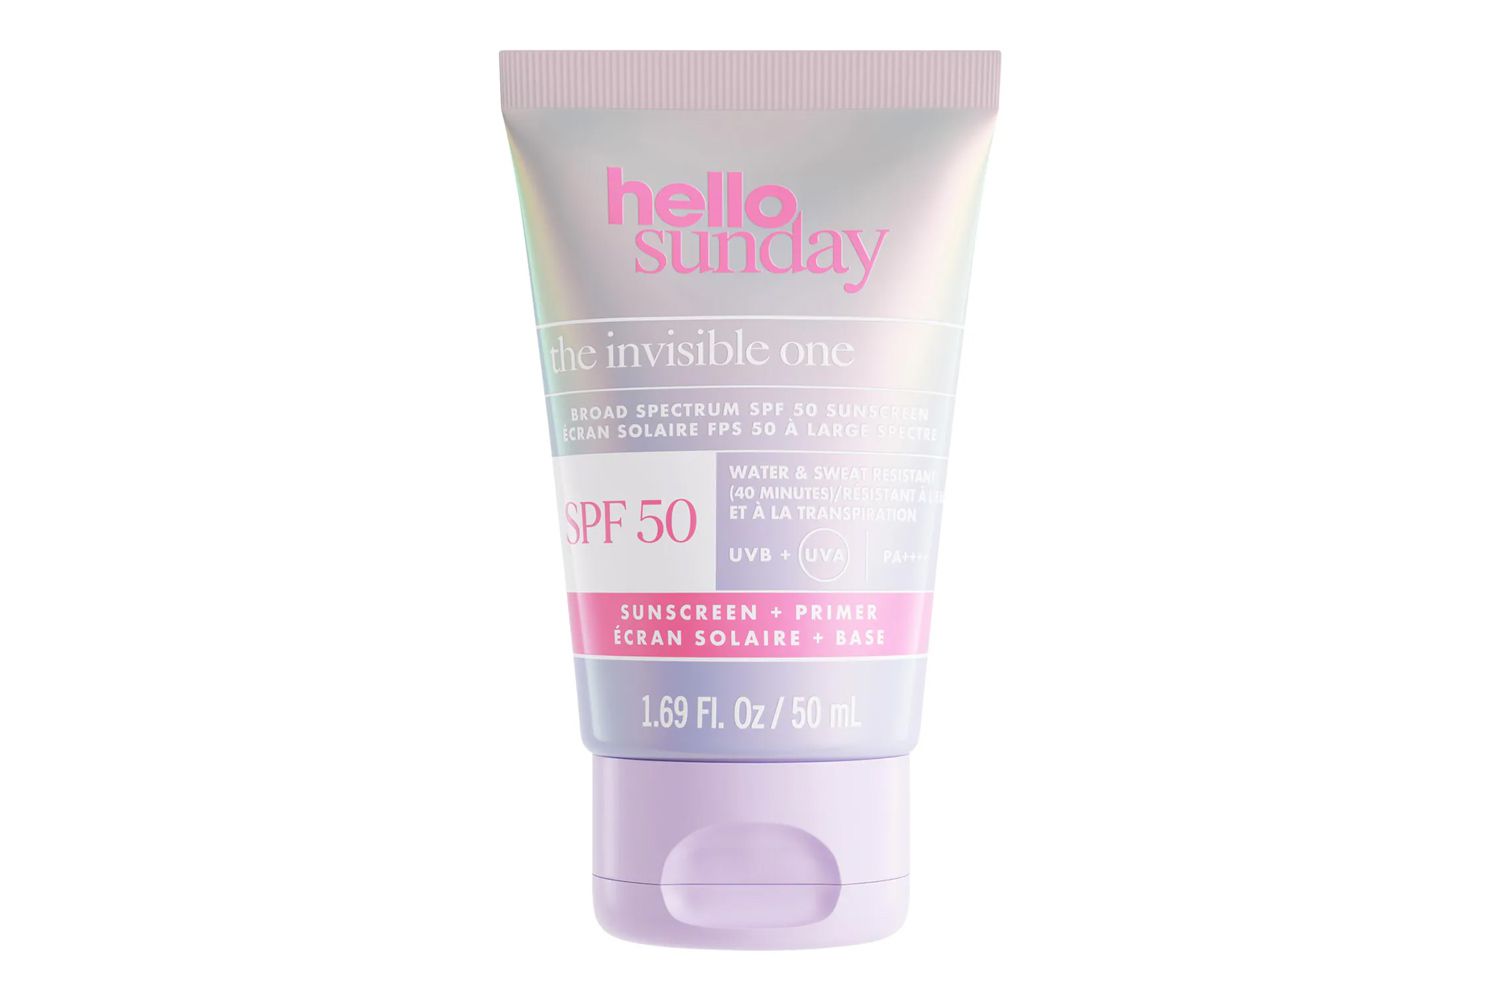 Sephora Hello Sunday The Invisible One SPF 50 Hydrating Sunscreen + Primer